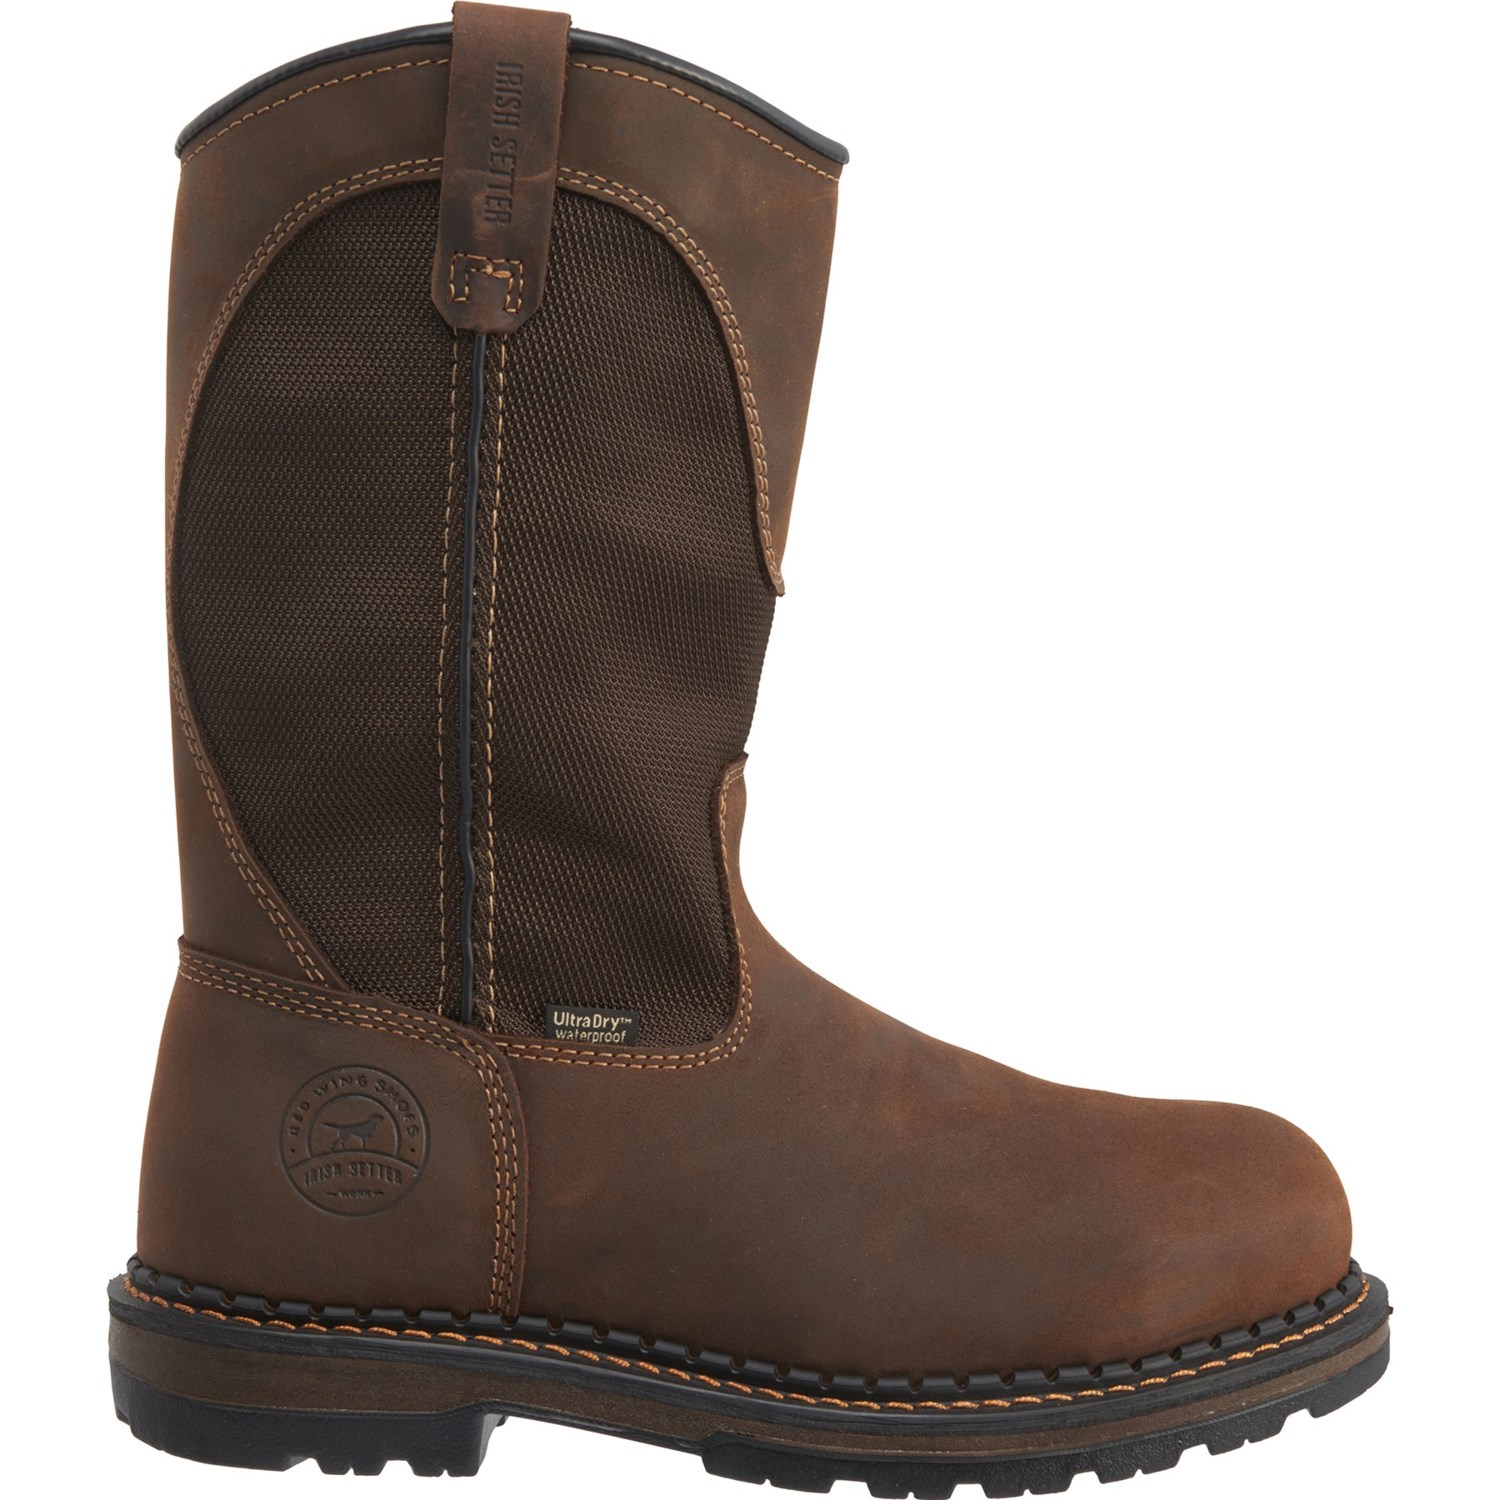 Irish Setter Brown 11 Ramsey Pull On Work Boots Waterproof Aluminum Safety Toe For Men~a~870uw 5~1500.1 